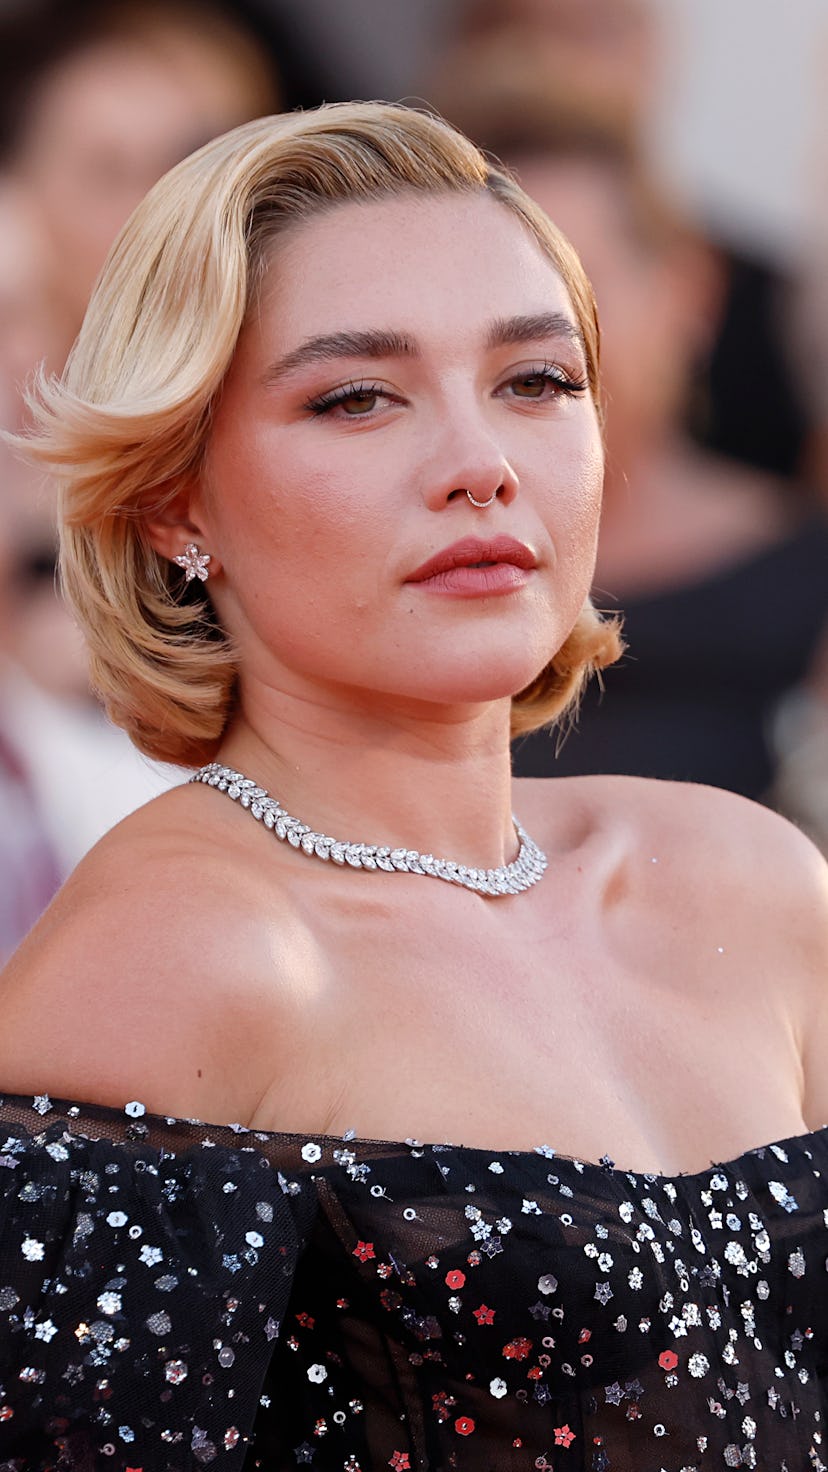 Here's a list of the best Florence Pugh movies